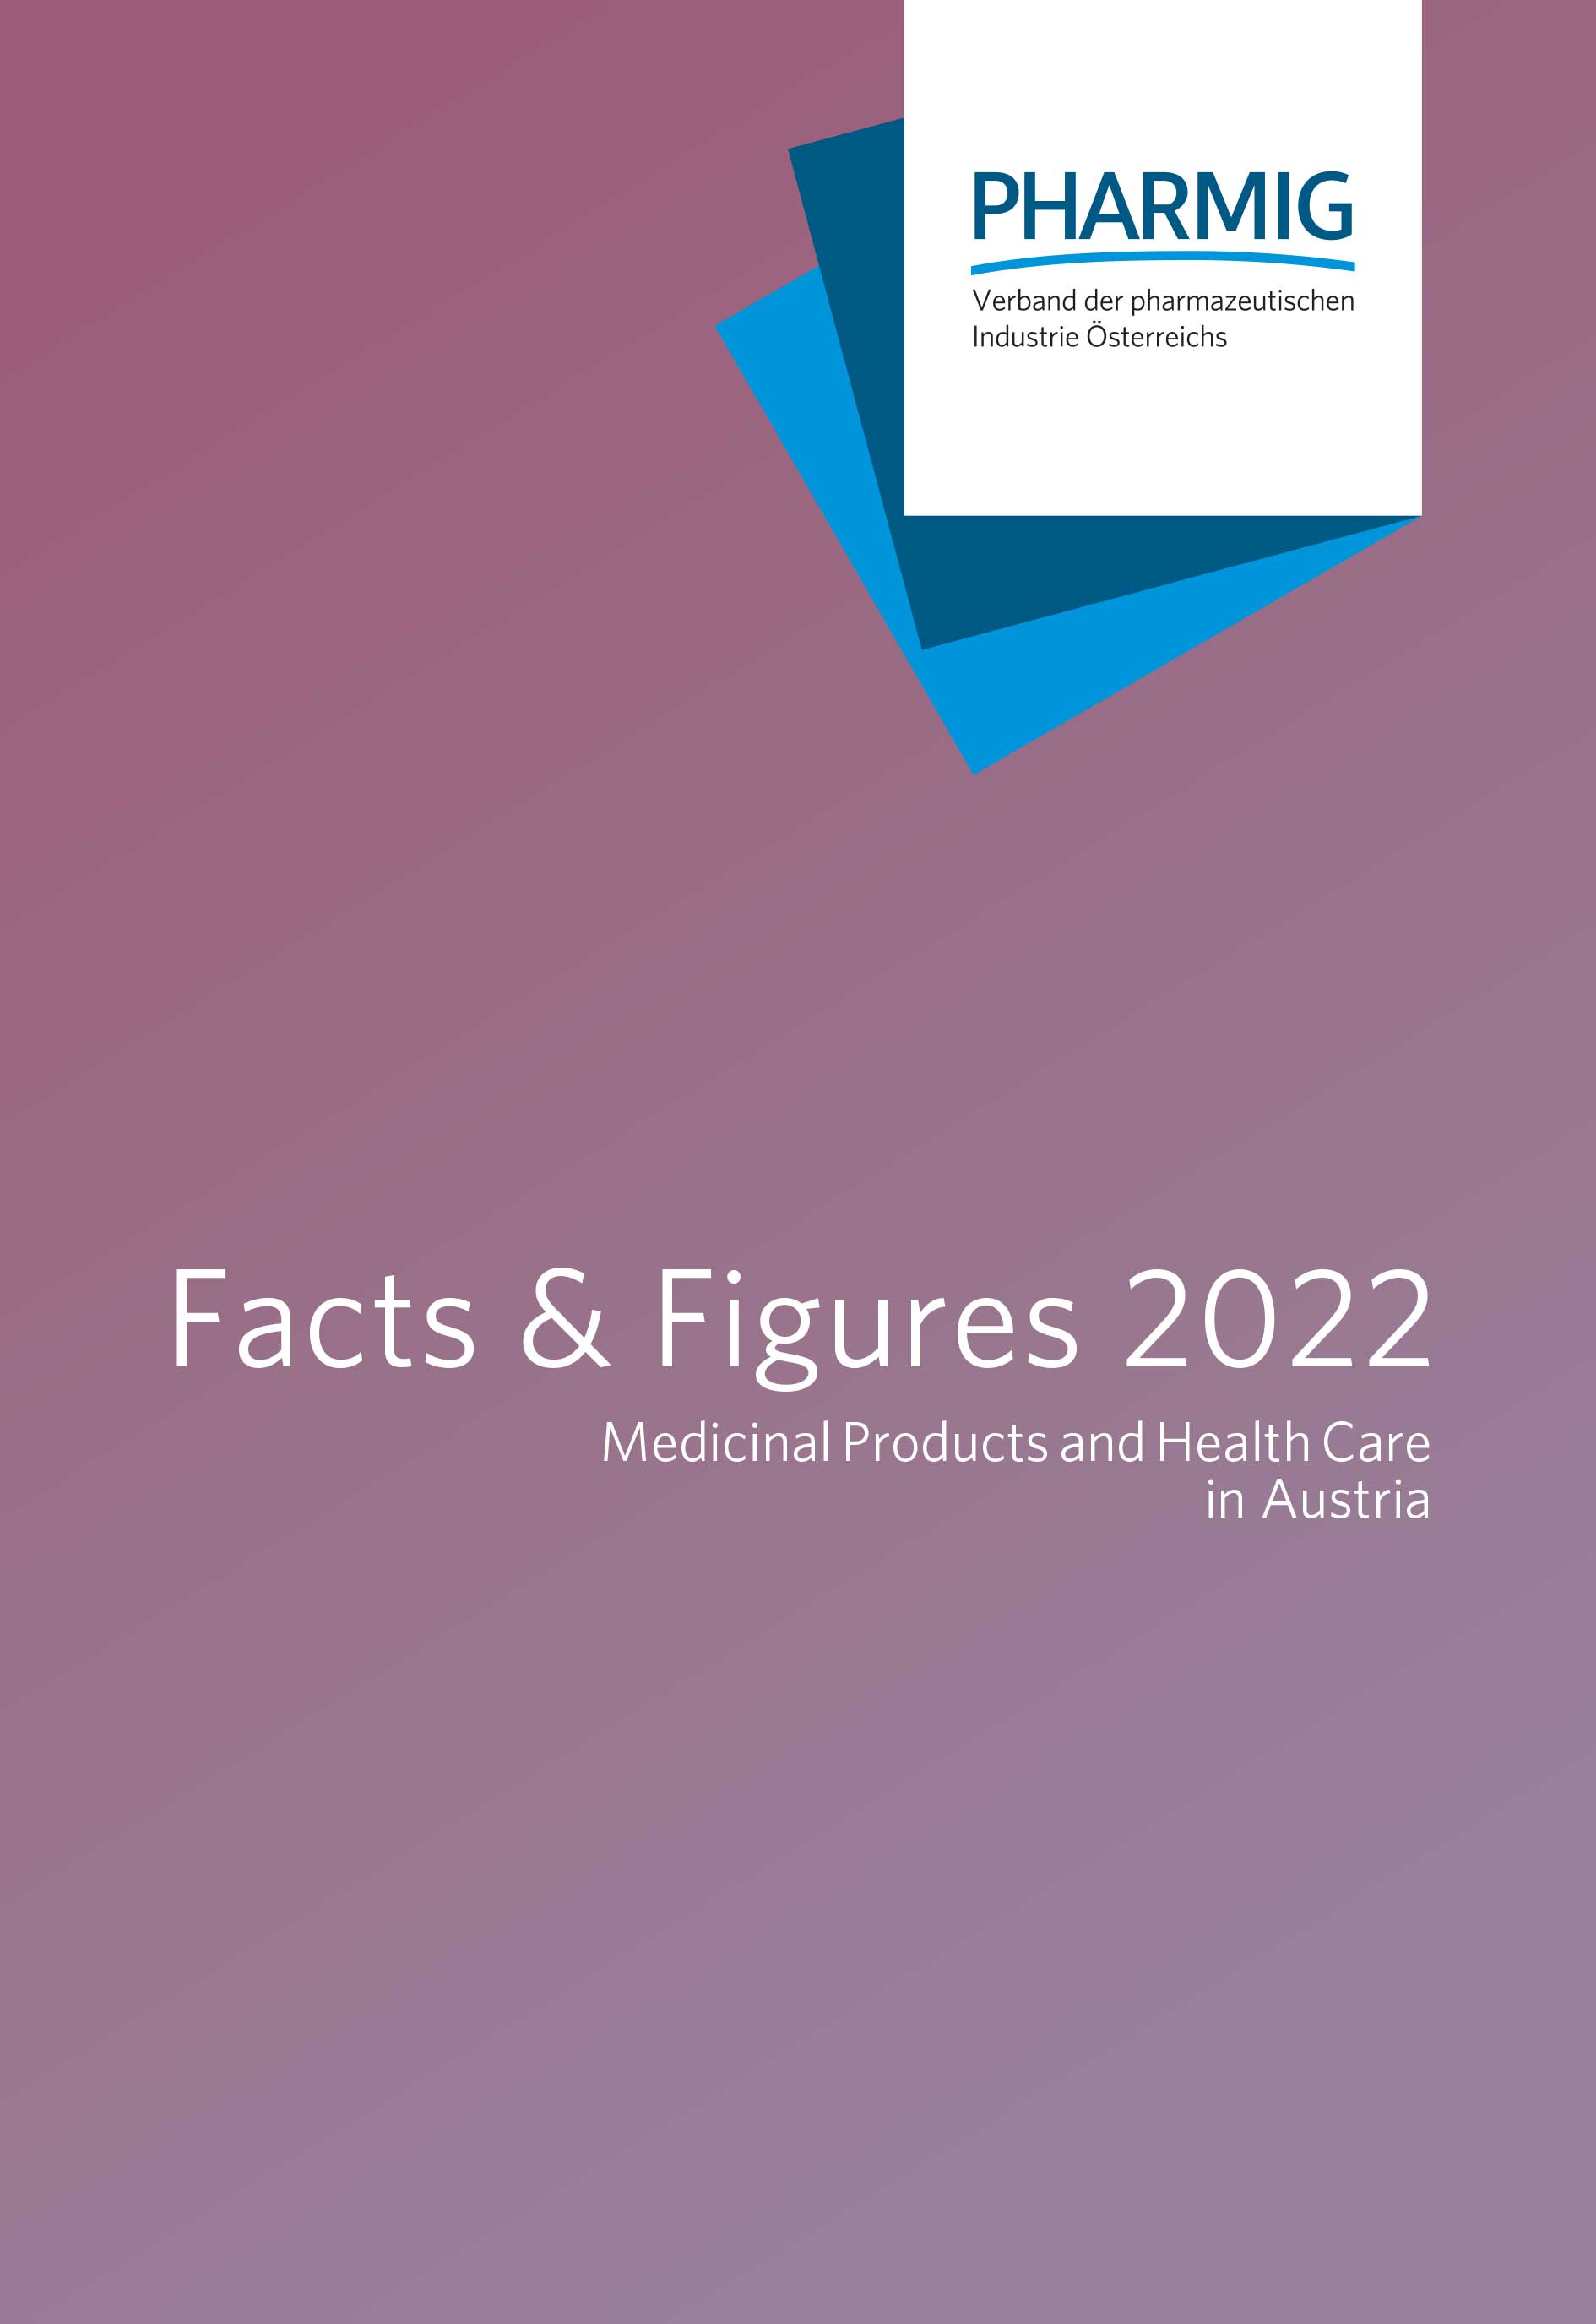 © Facts & Figures 2022